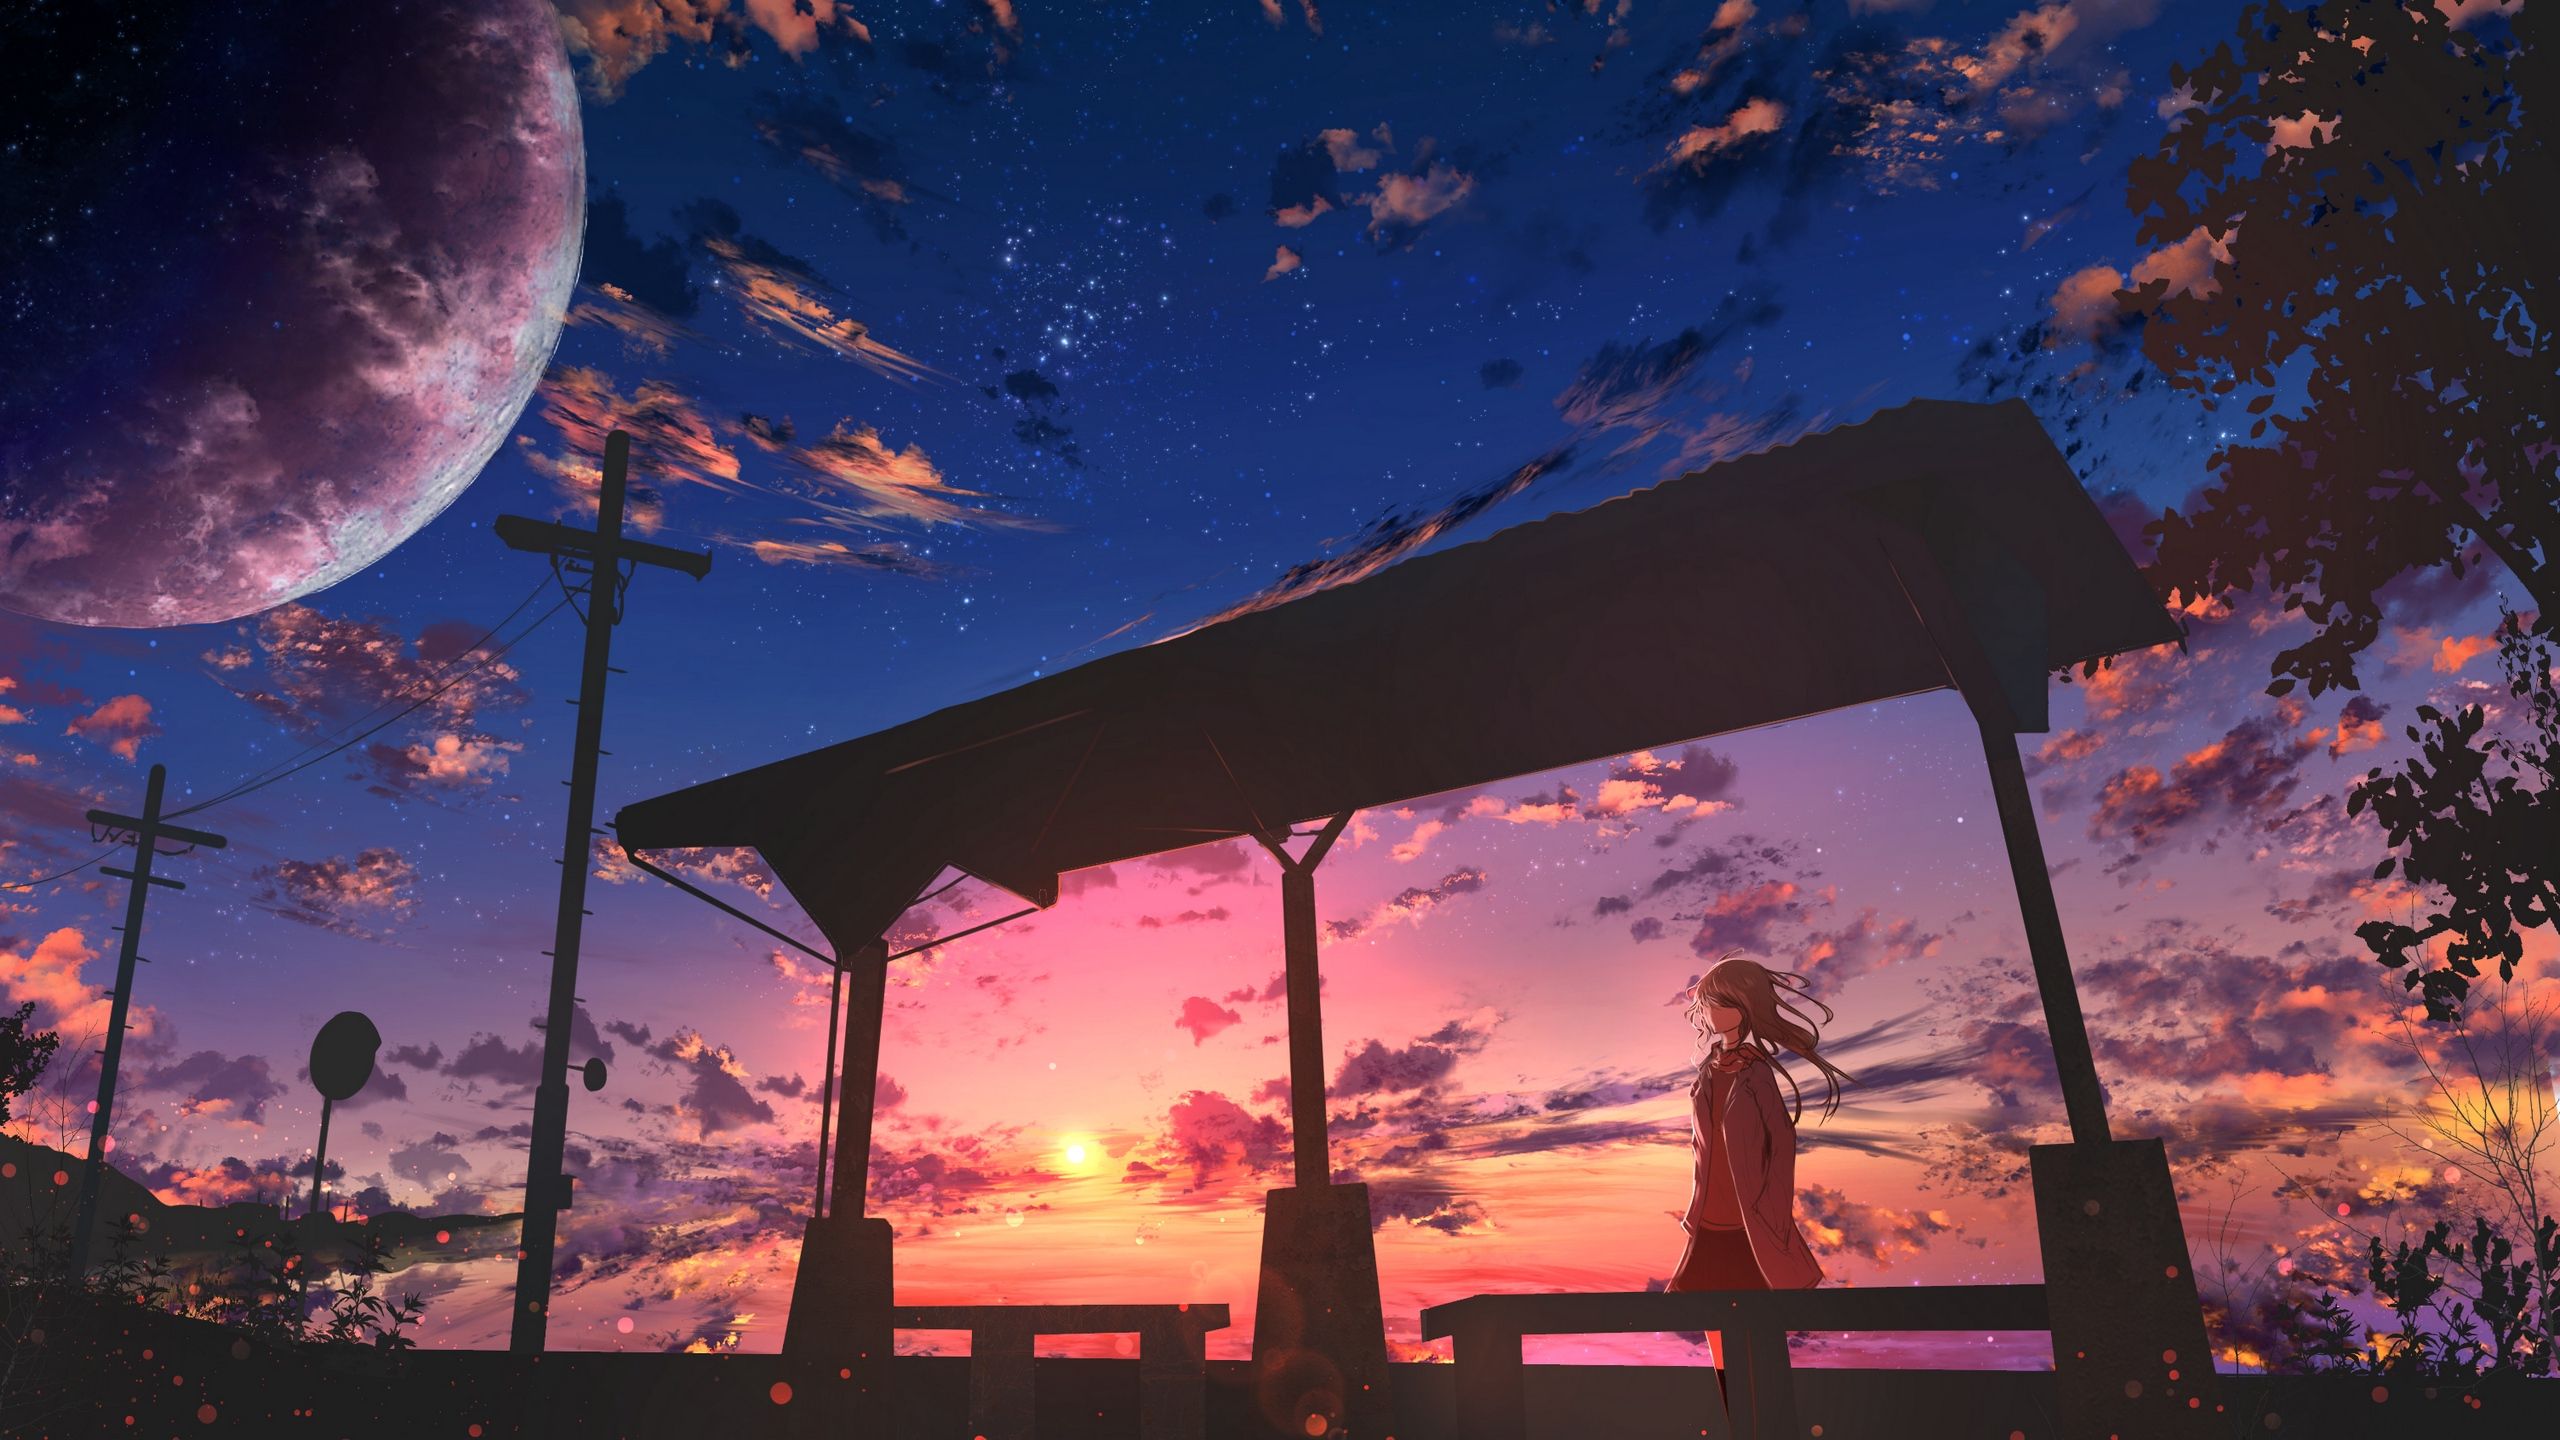 Download wallpaper 2560x1440 girl, twilight, clouds, anime widescreen 16:9 HD background